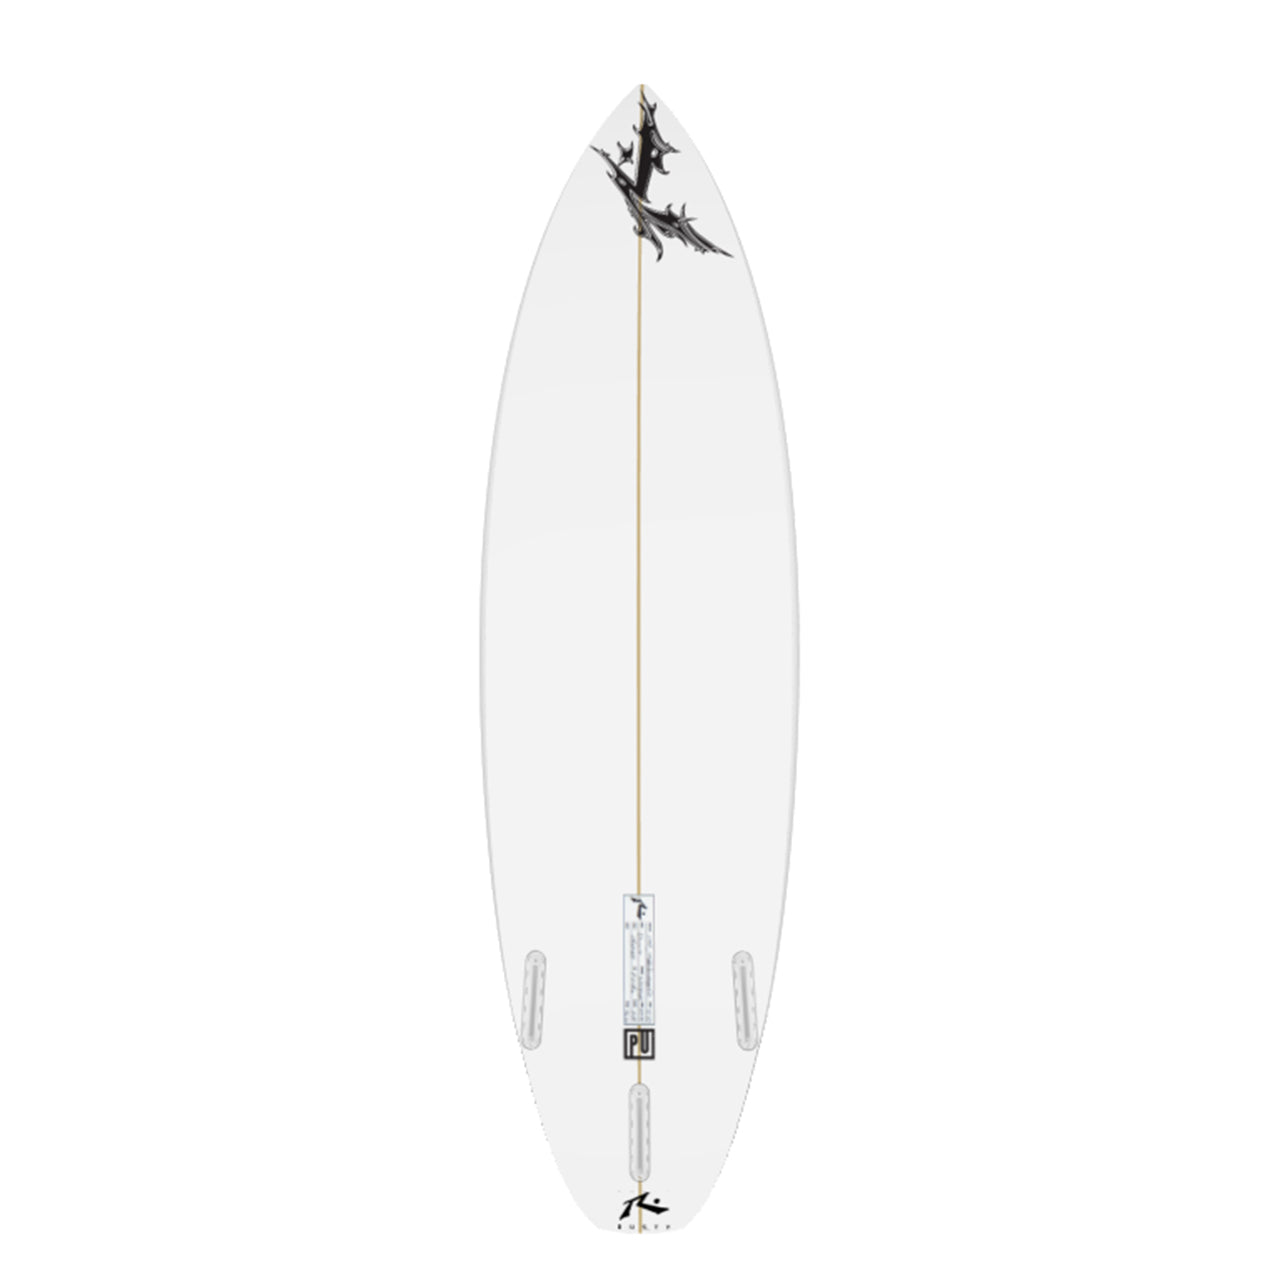 Shiv - High Performance Shortboard - Rusty Surfboards - Top View